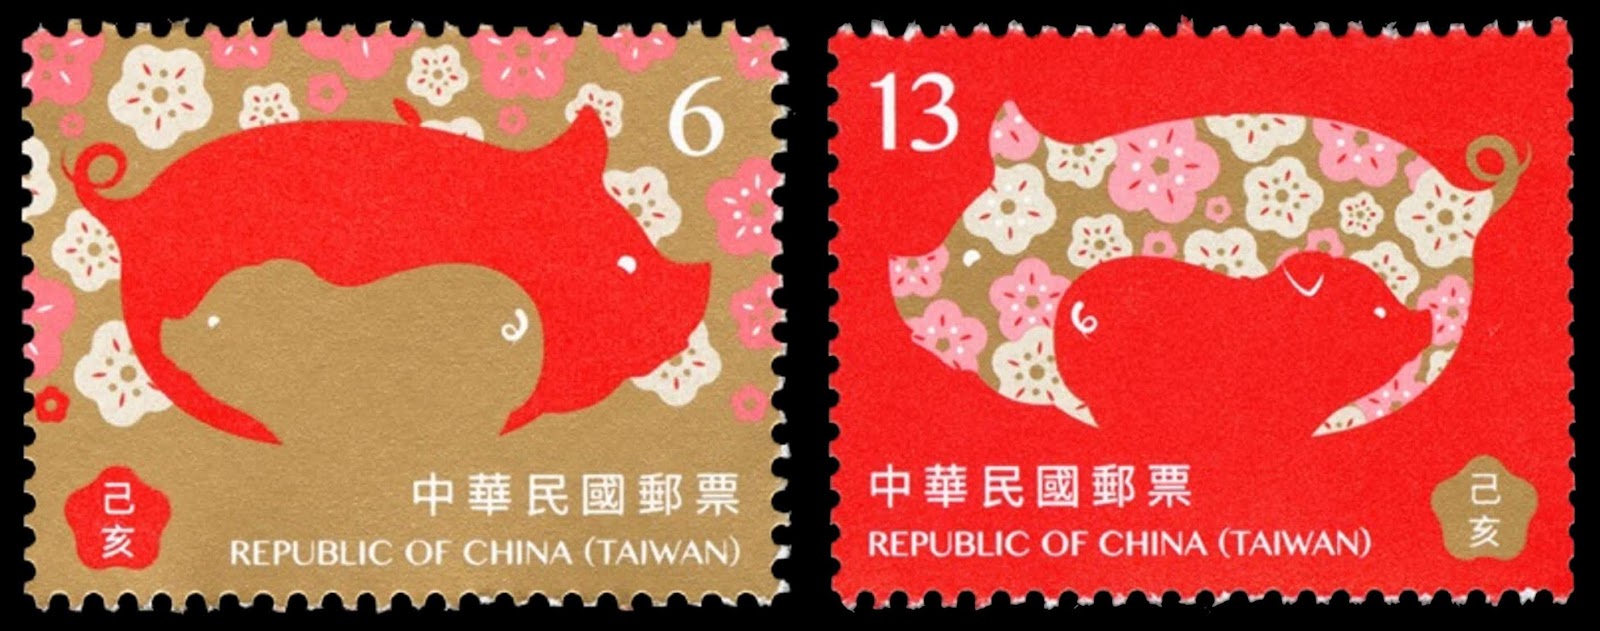 Taiwan stamps